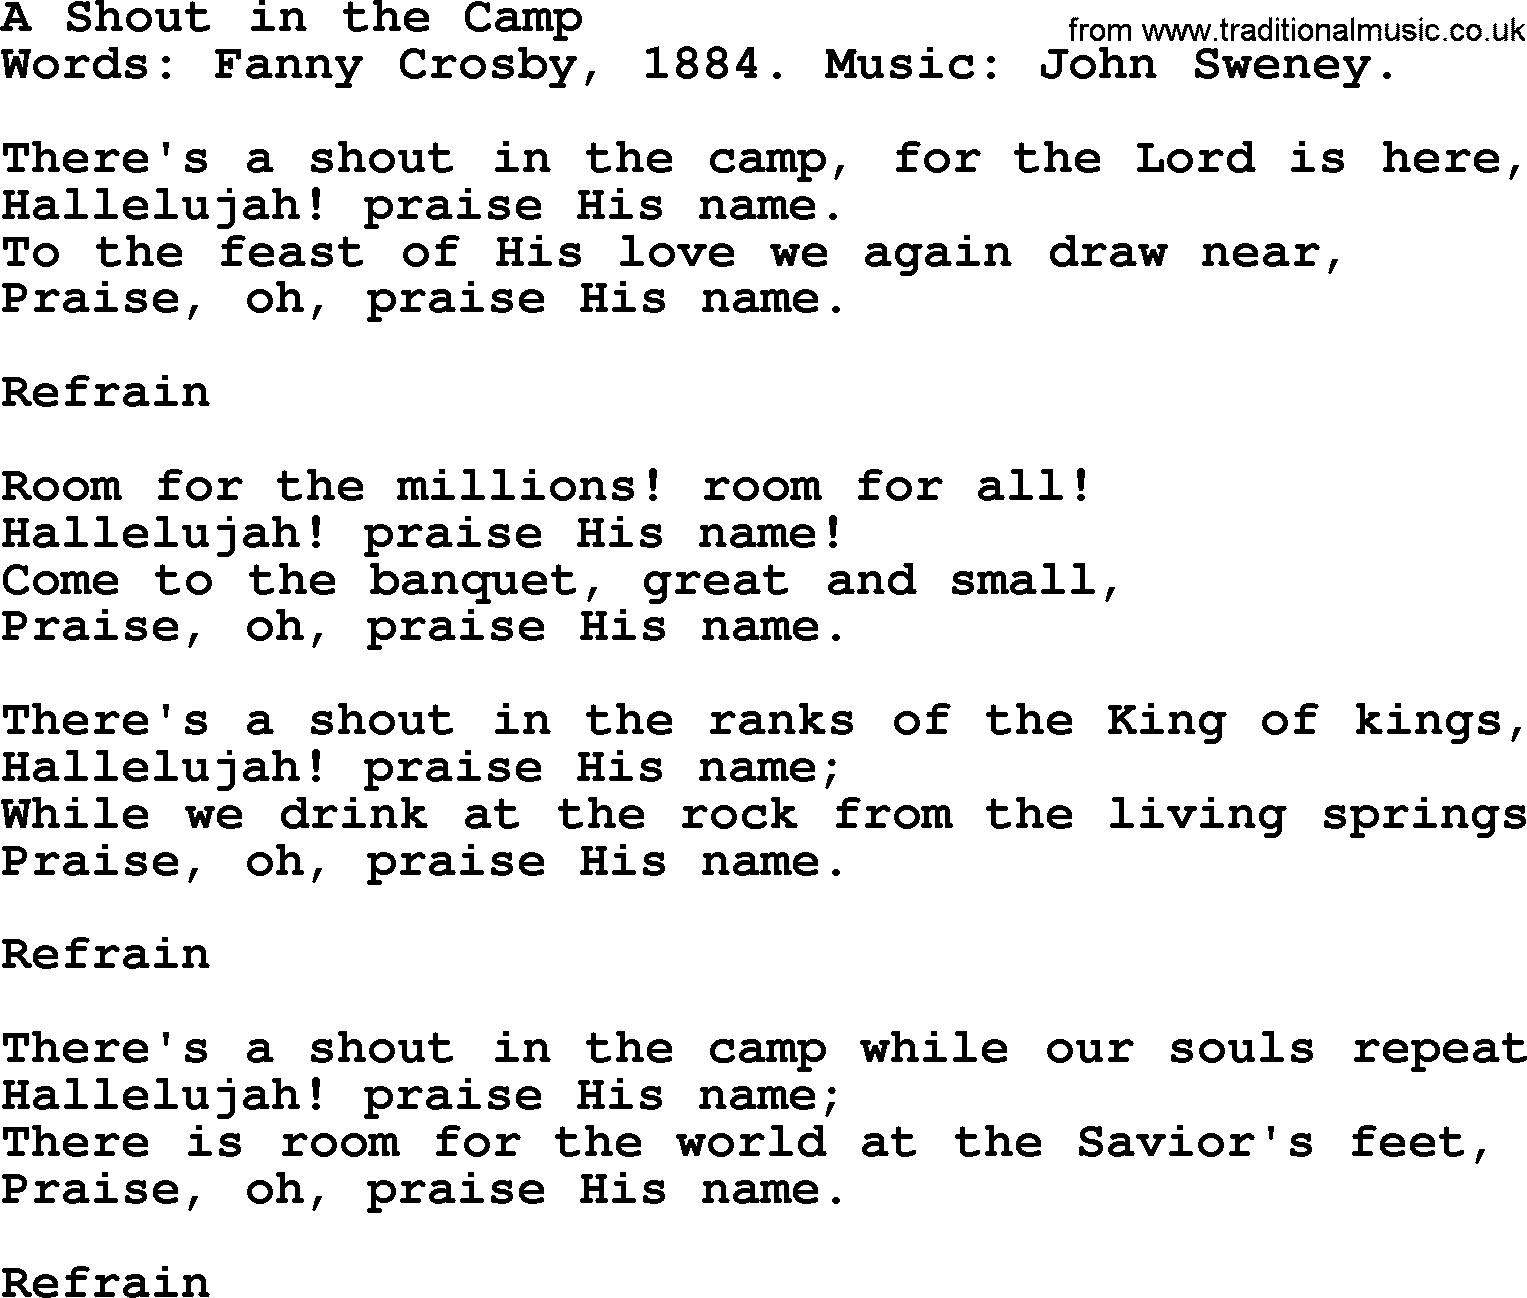 Fanny Crosby song: A Shout In The Camp, lyrics